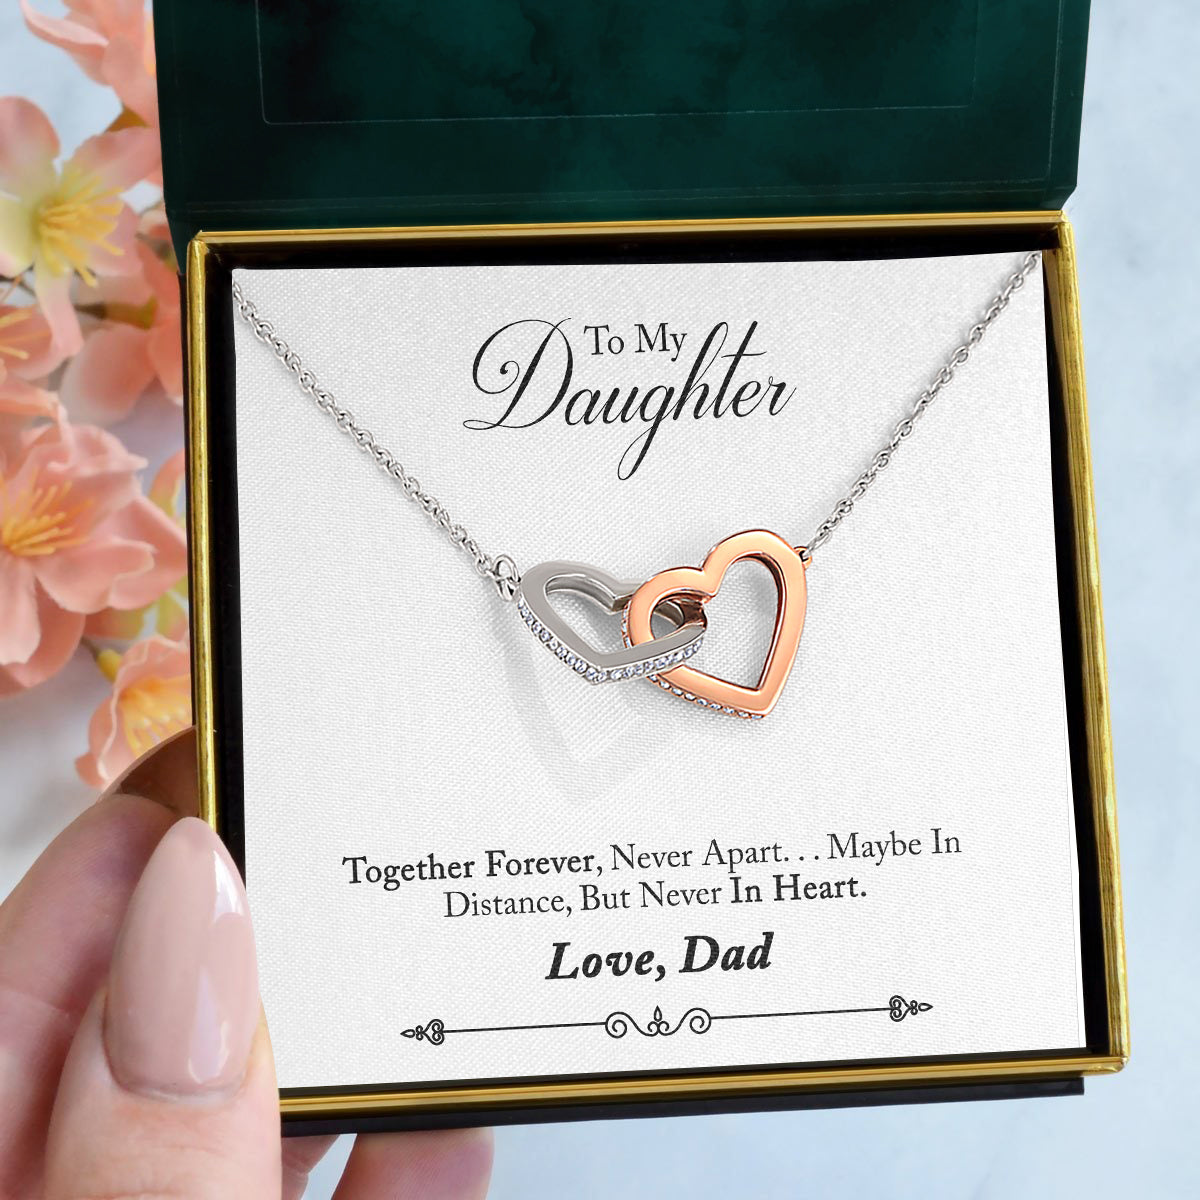 To My Daughter | "Together Forever" | Interlocking Hearts Necklace